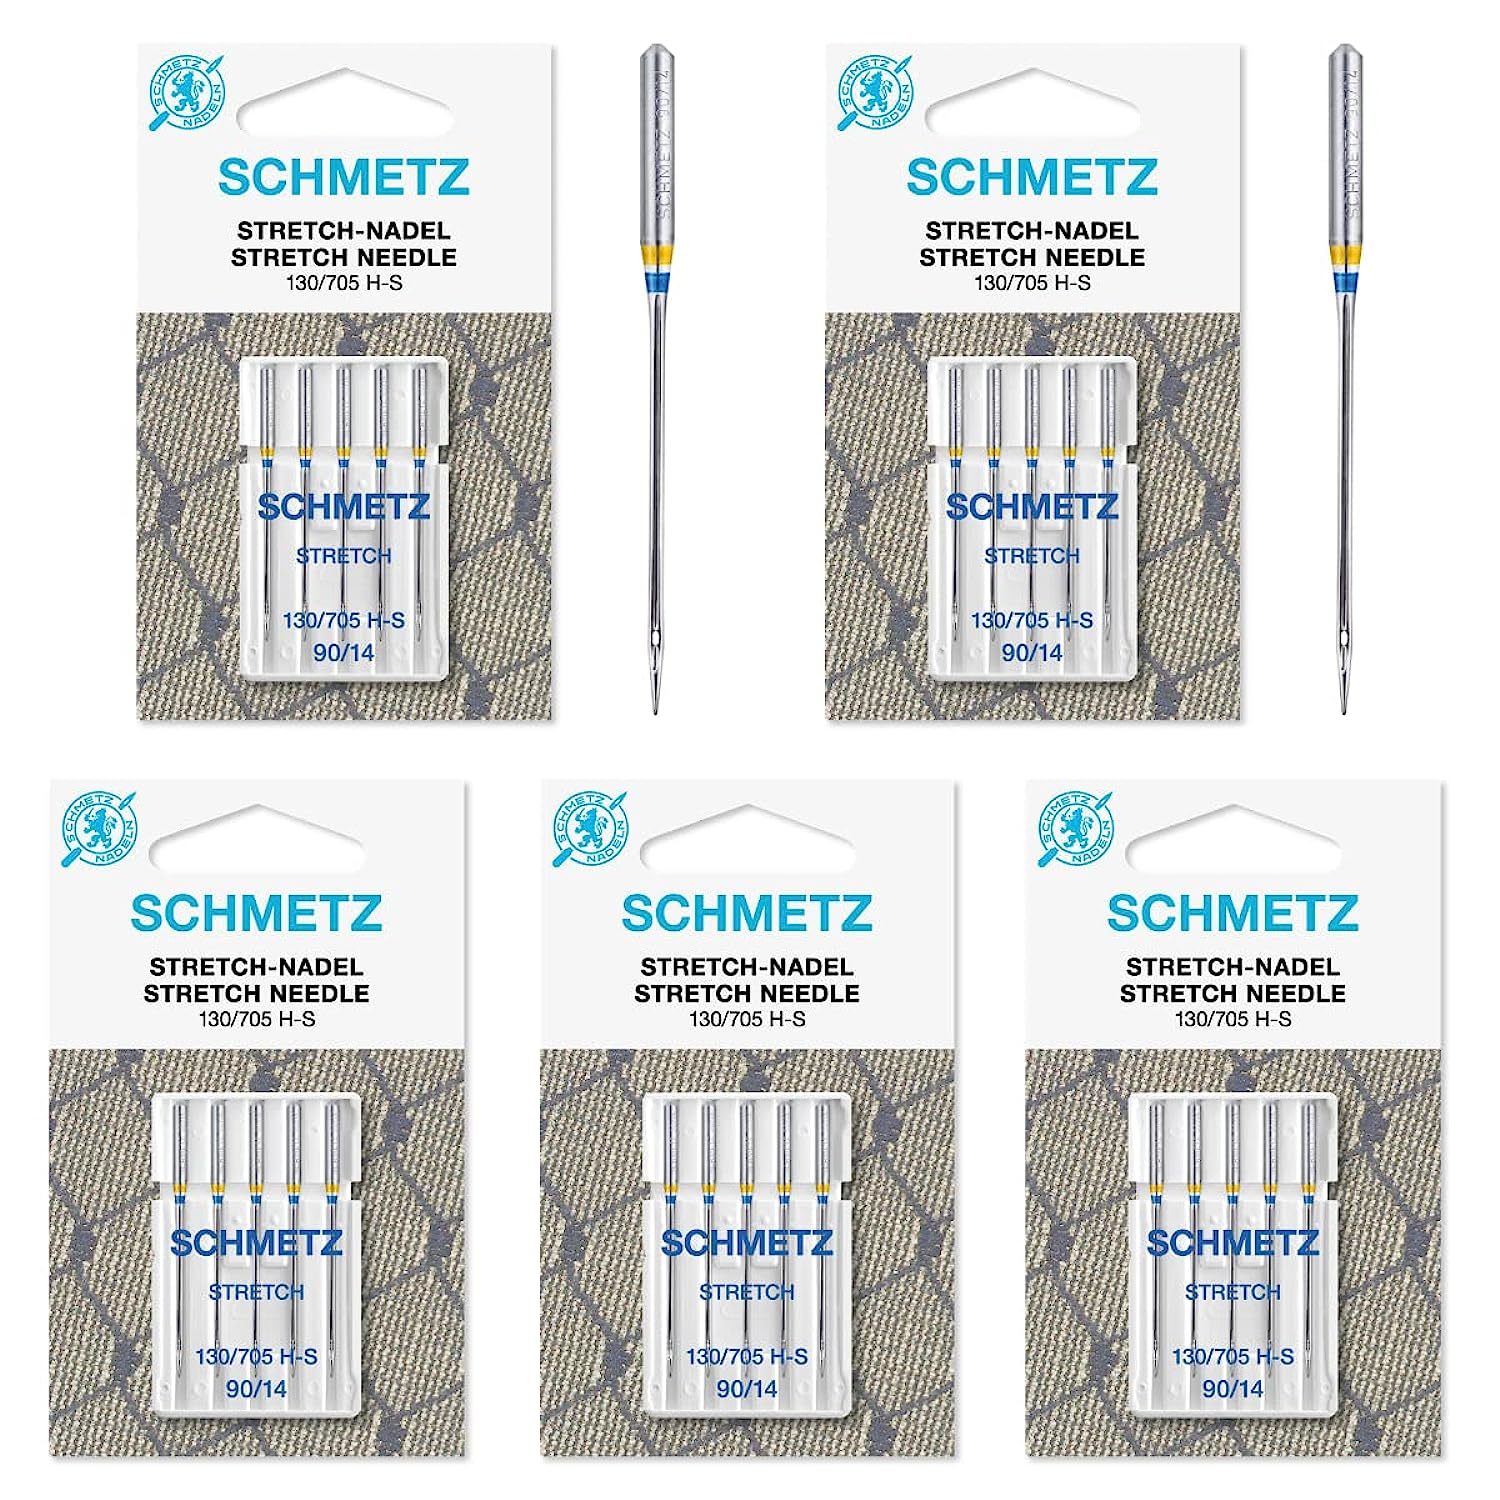 50 Schmetz Gold Embroidery Sewing Machine Needles - size90/14 - Box of 10 Cards